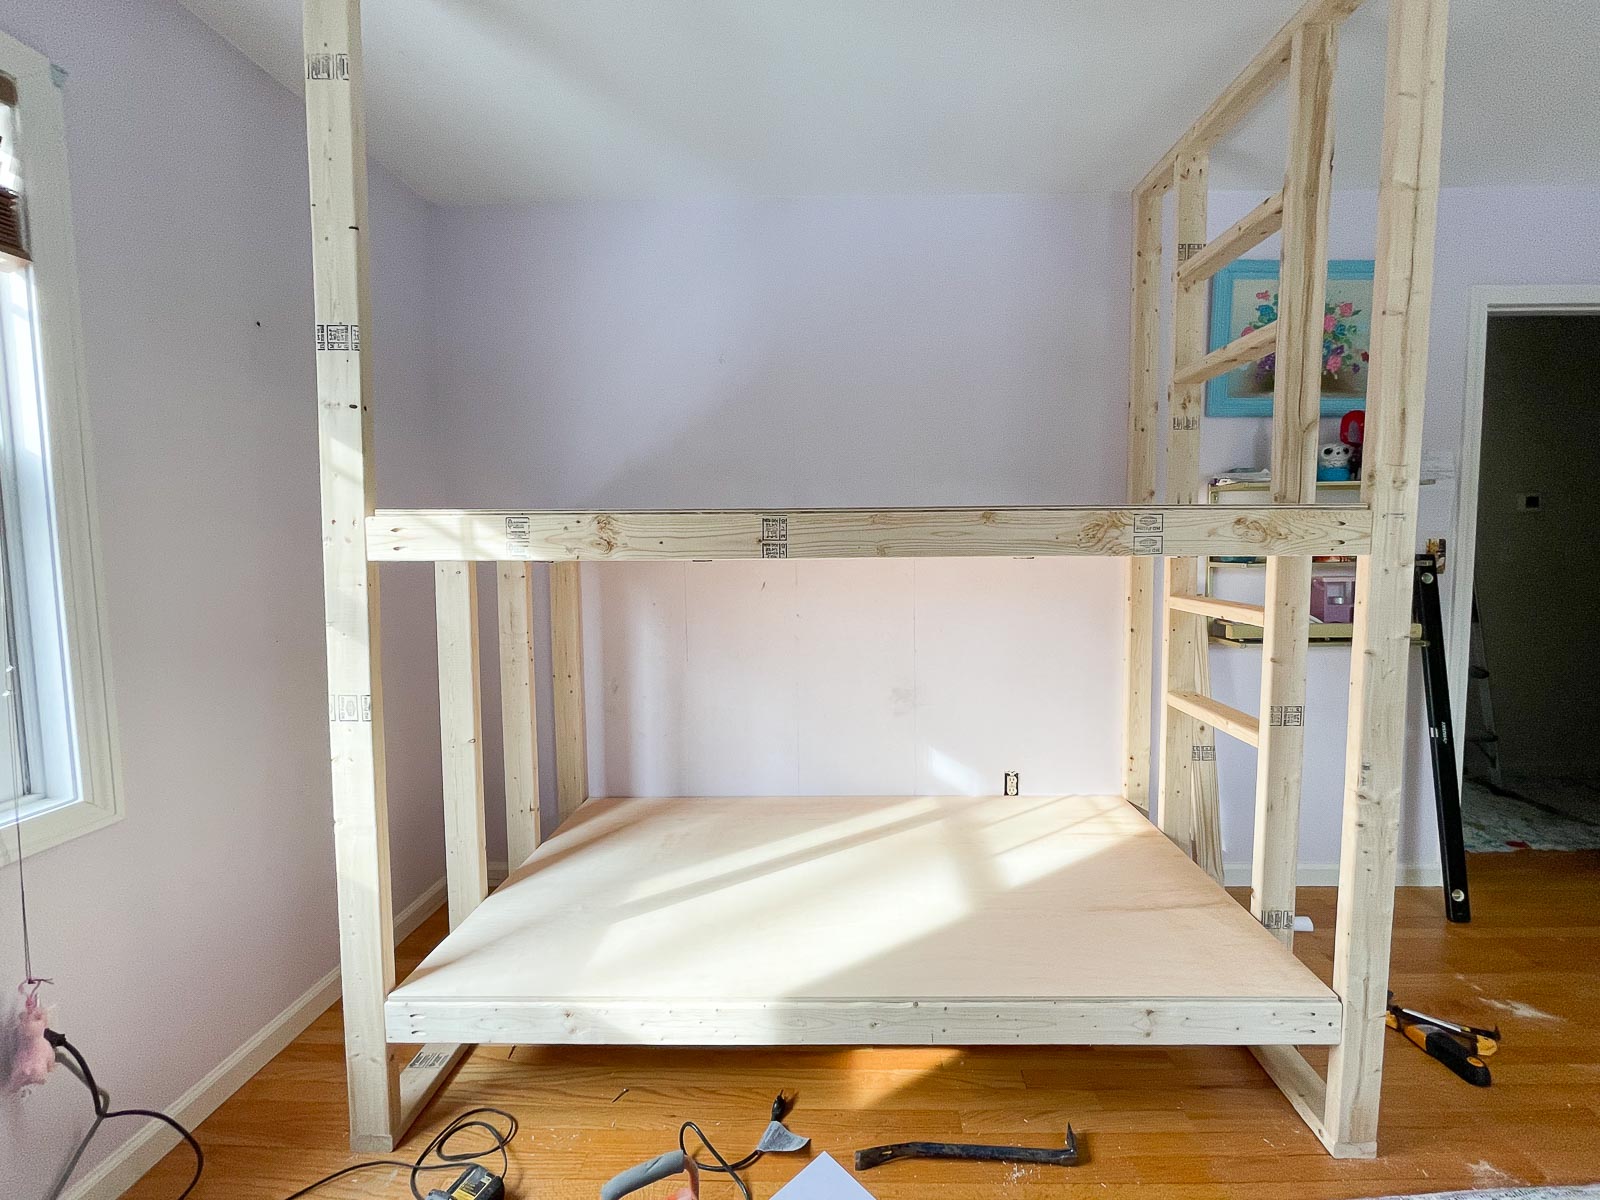 plywood on bunk bed